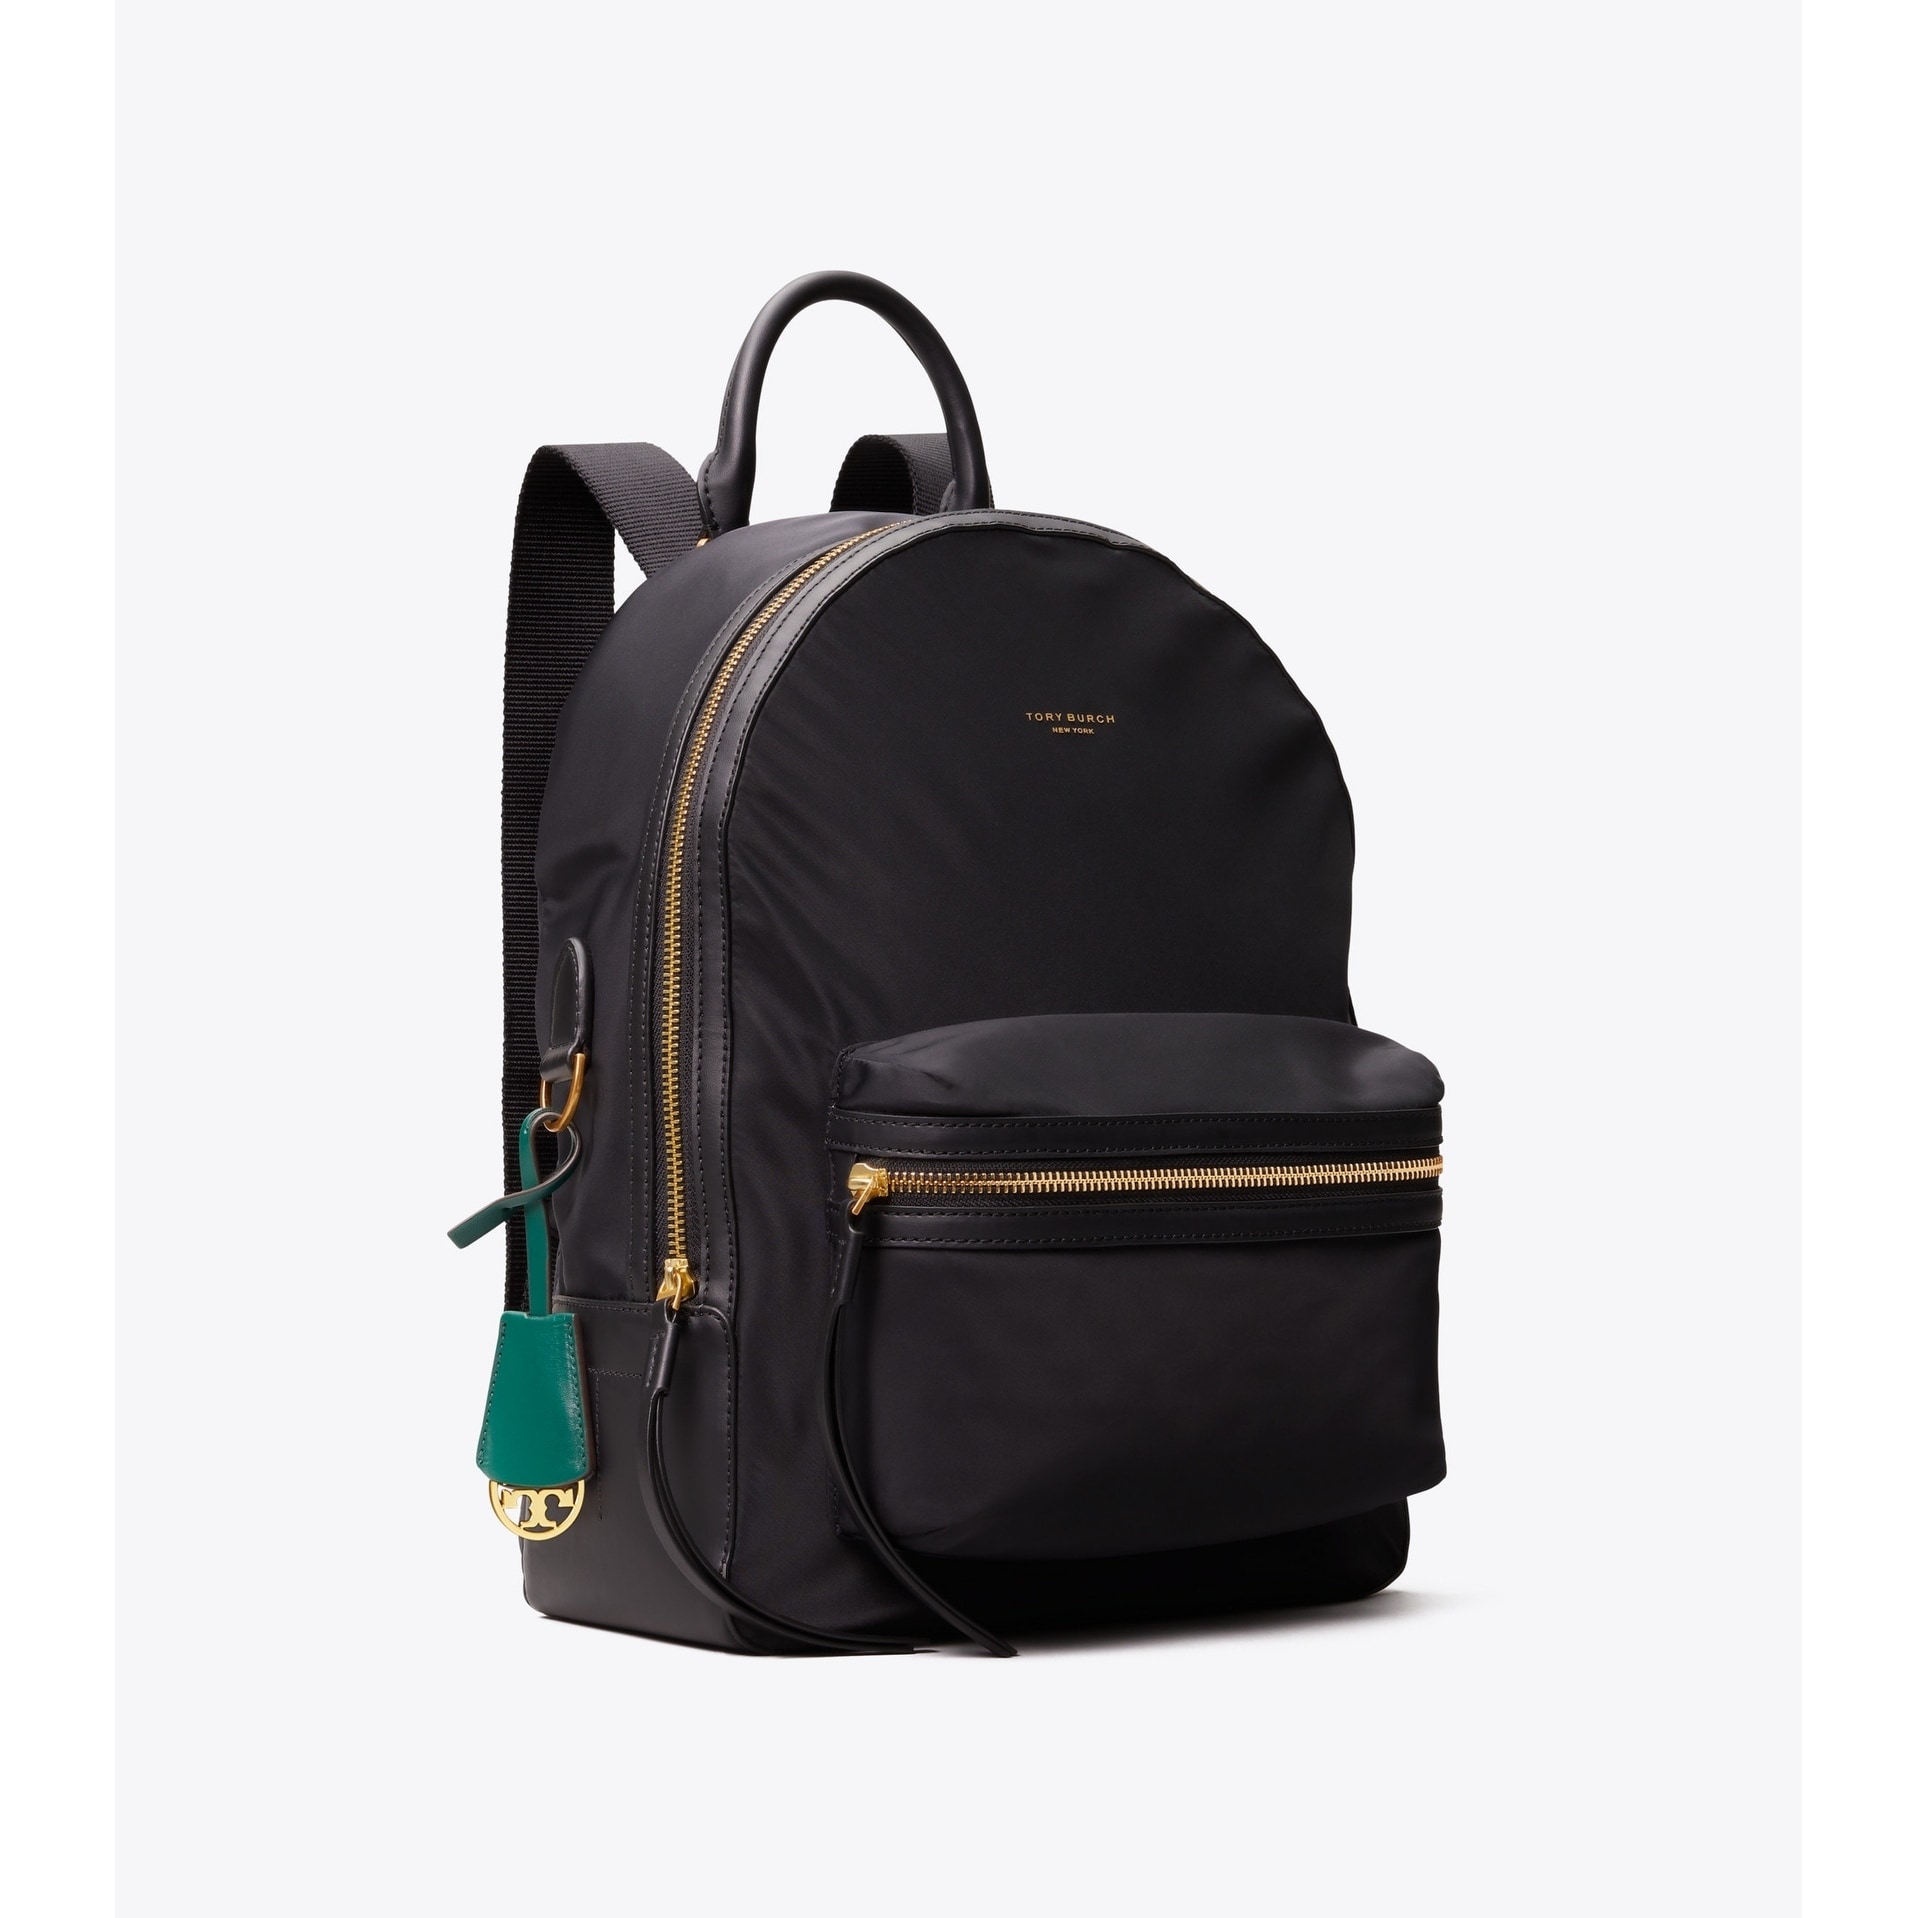 backpack online shopping singapore